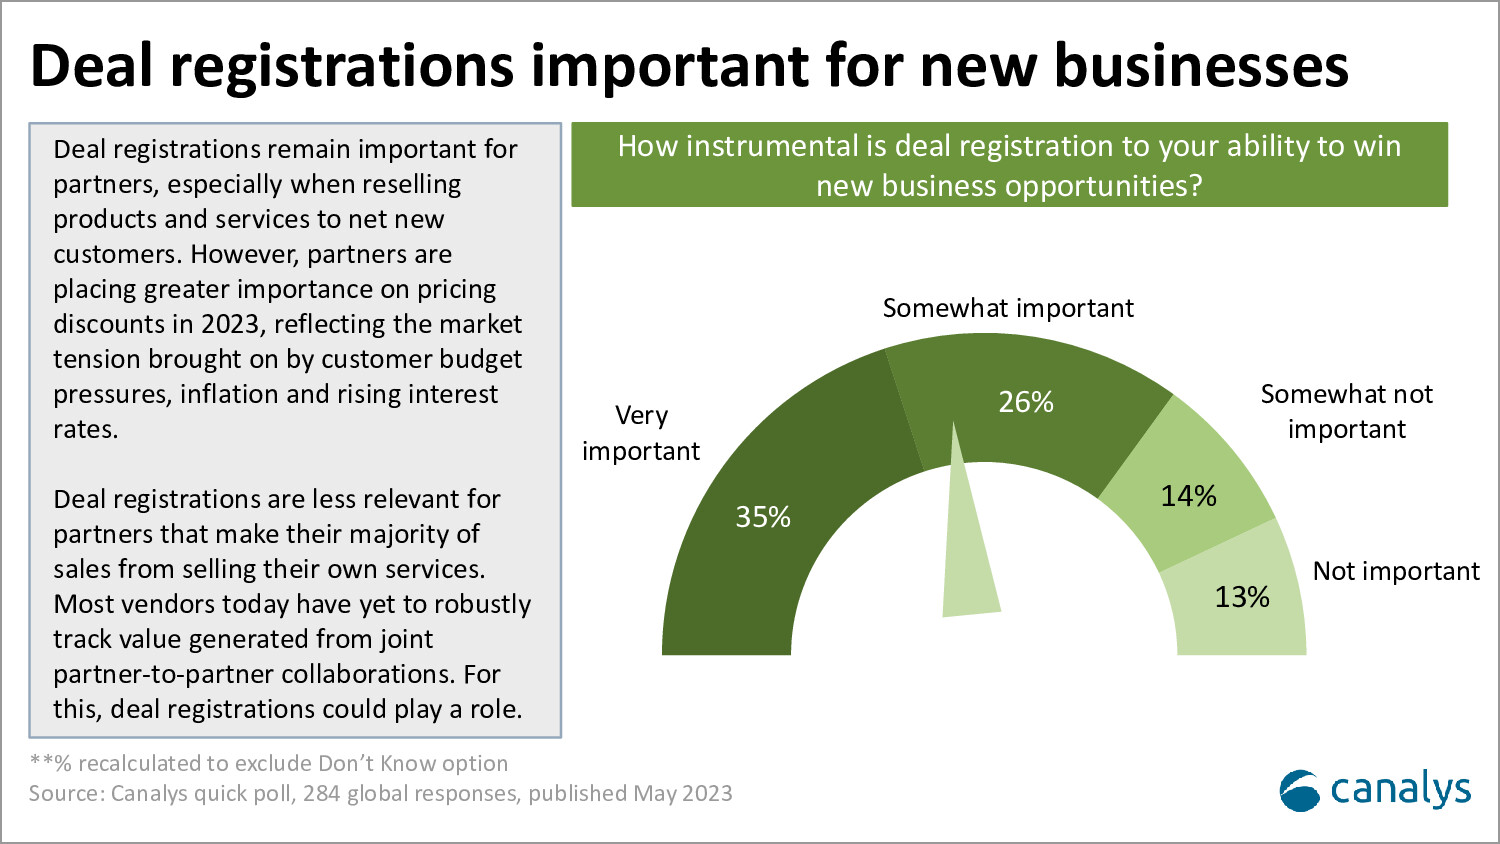 Partners' changing priorities for deal registration